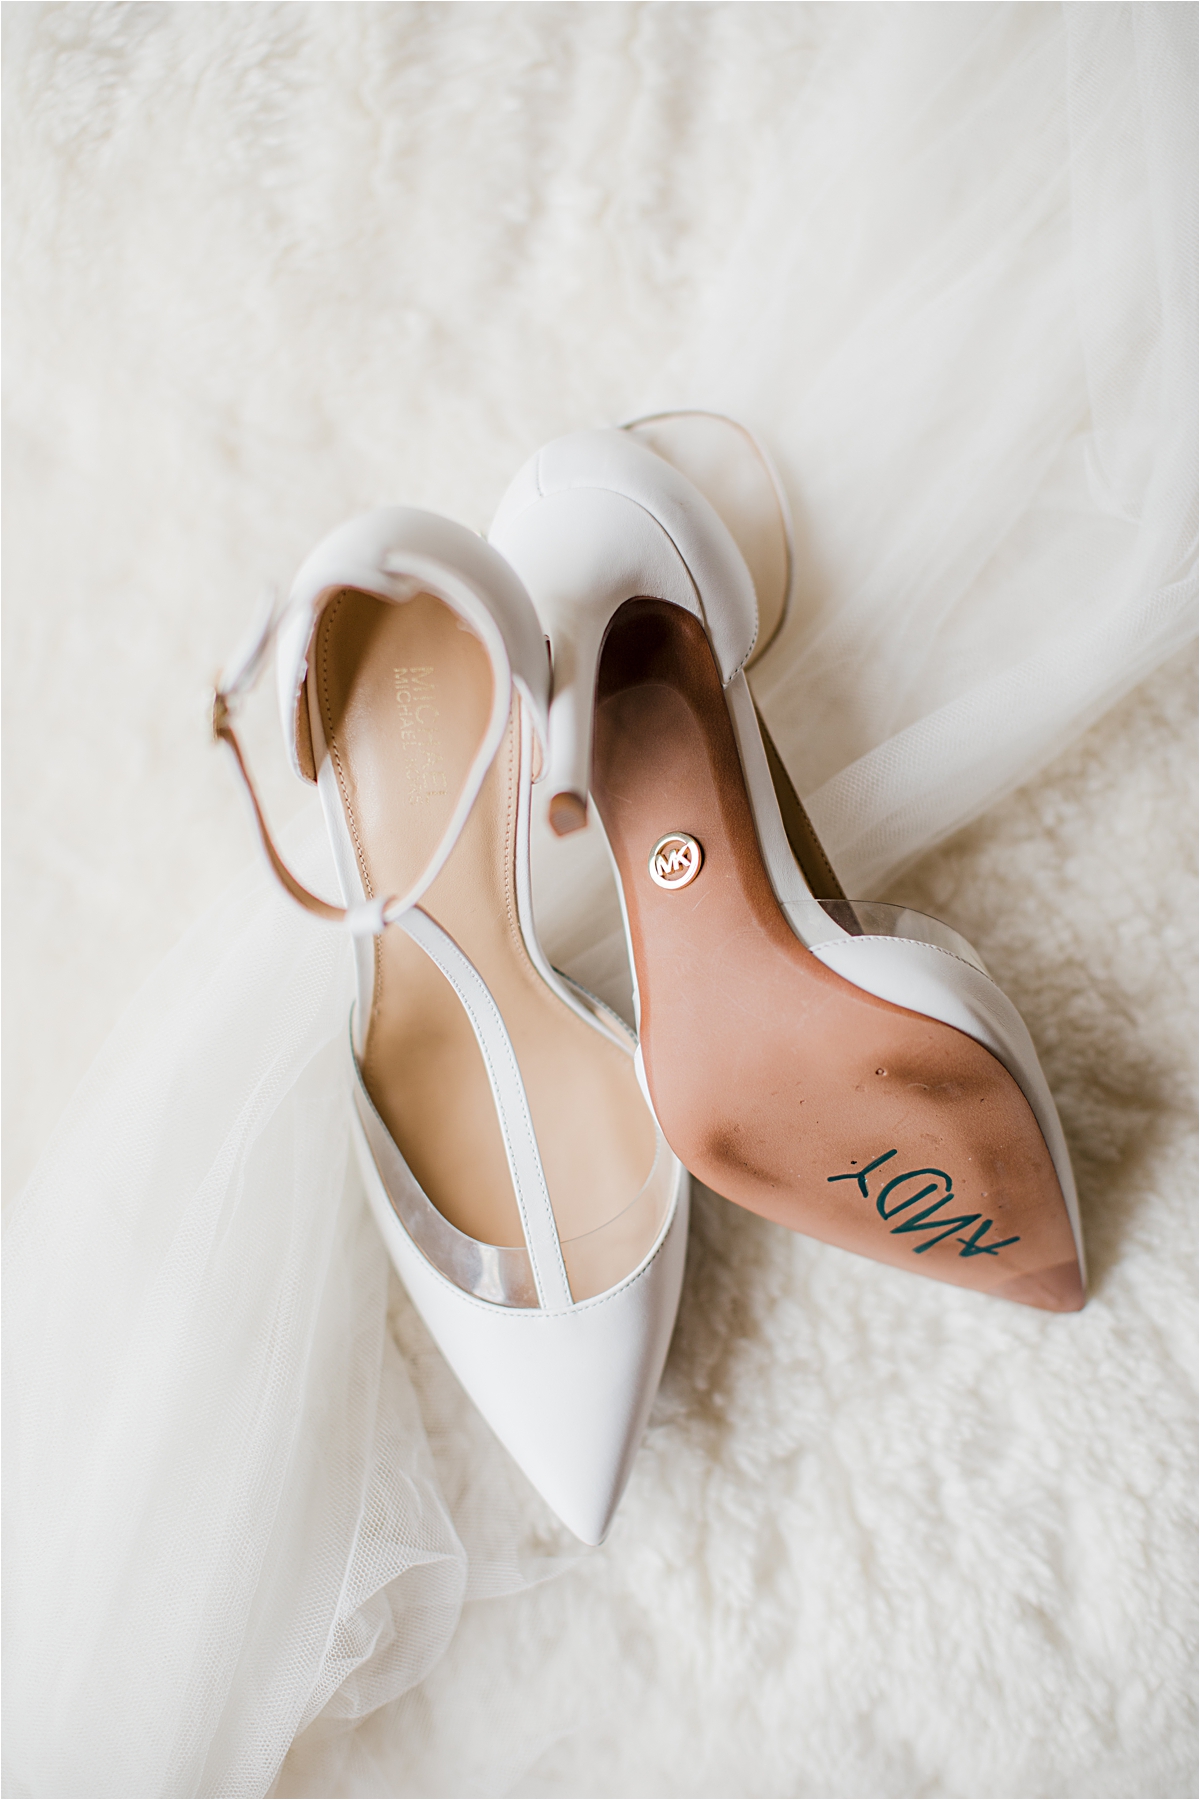 grooms-name-on-bottom-of-brides-heel-toy-story